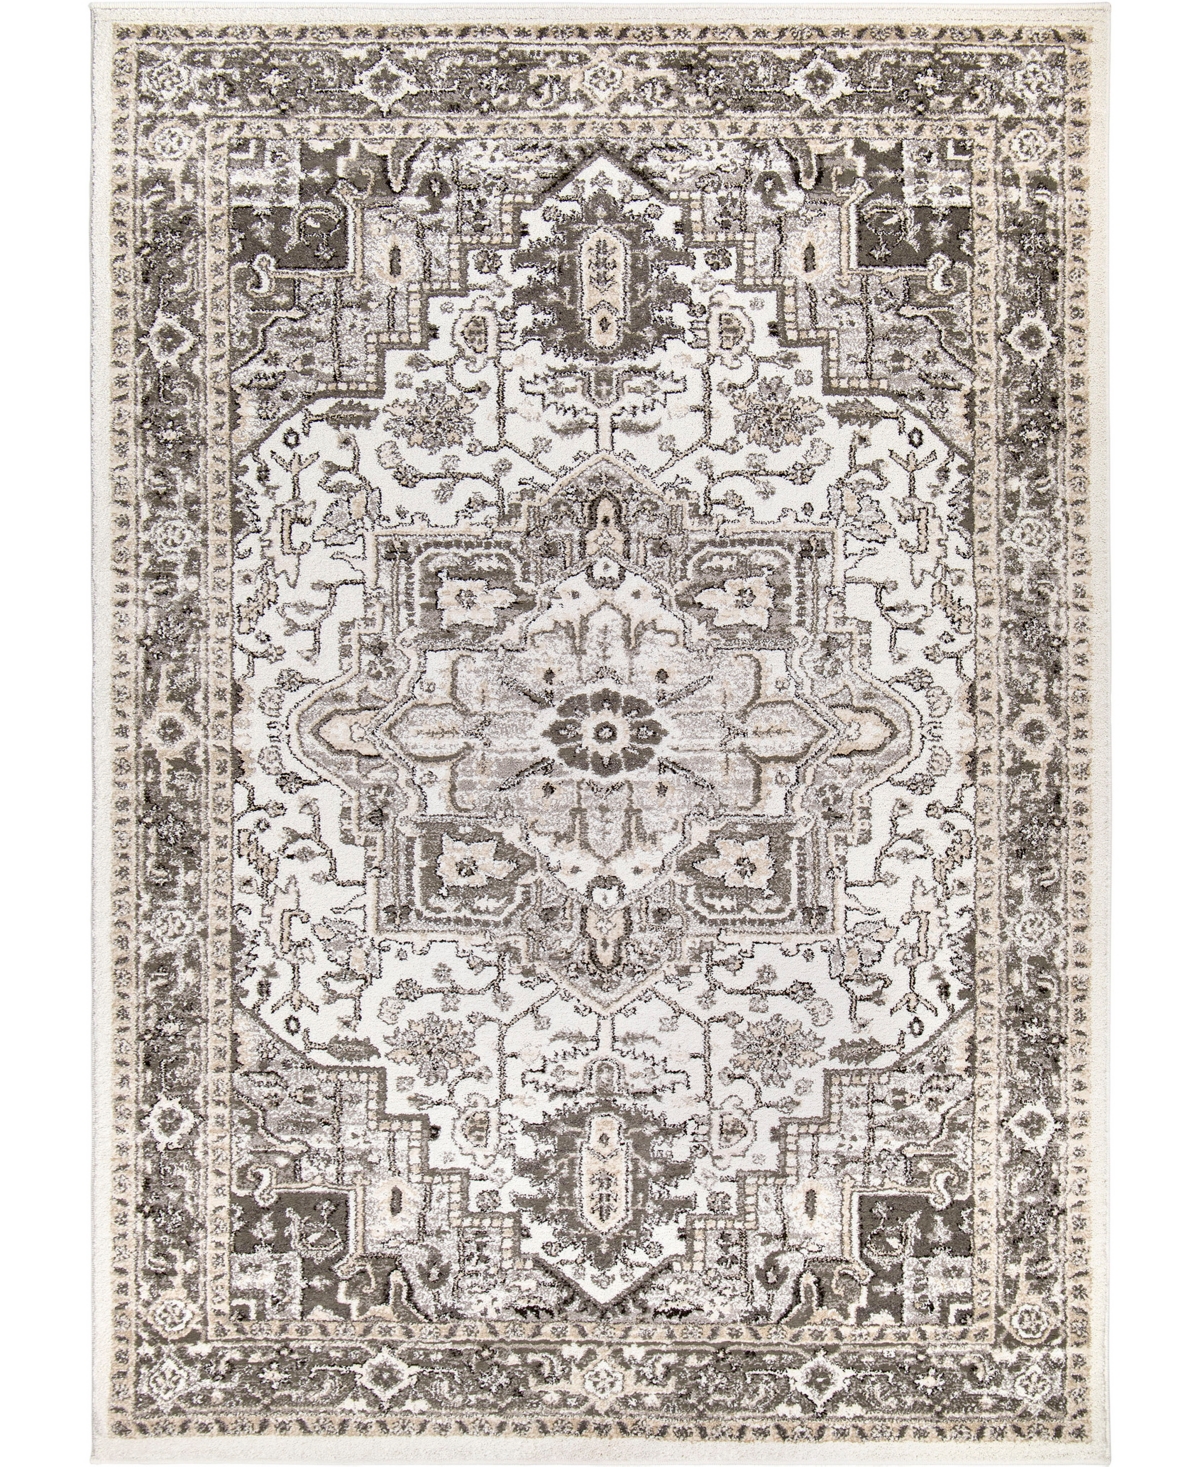 My Texas House Lone Star Belle 5'3in x 7'6in Area Rug - White, Gray